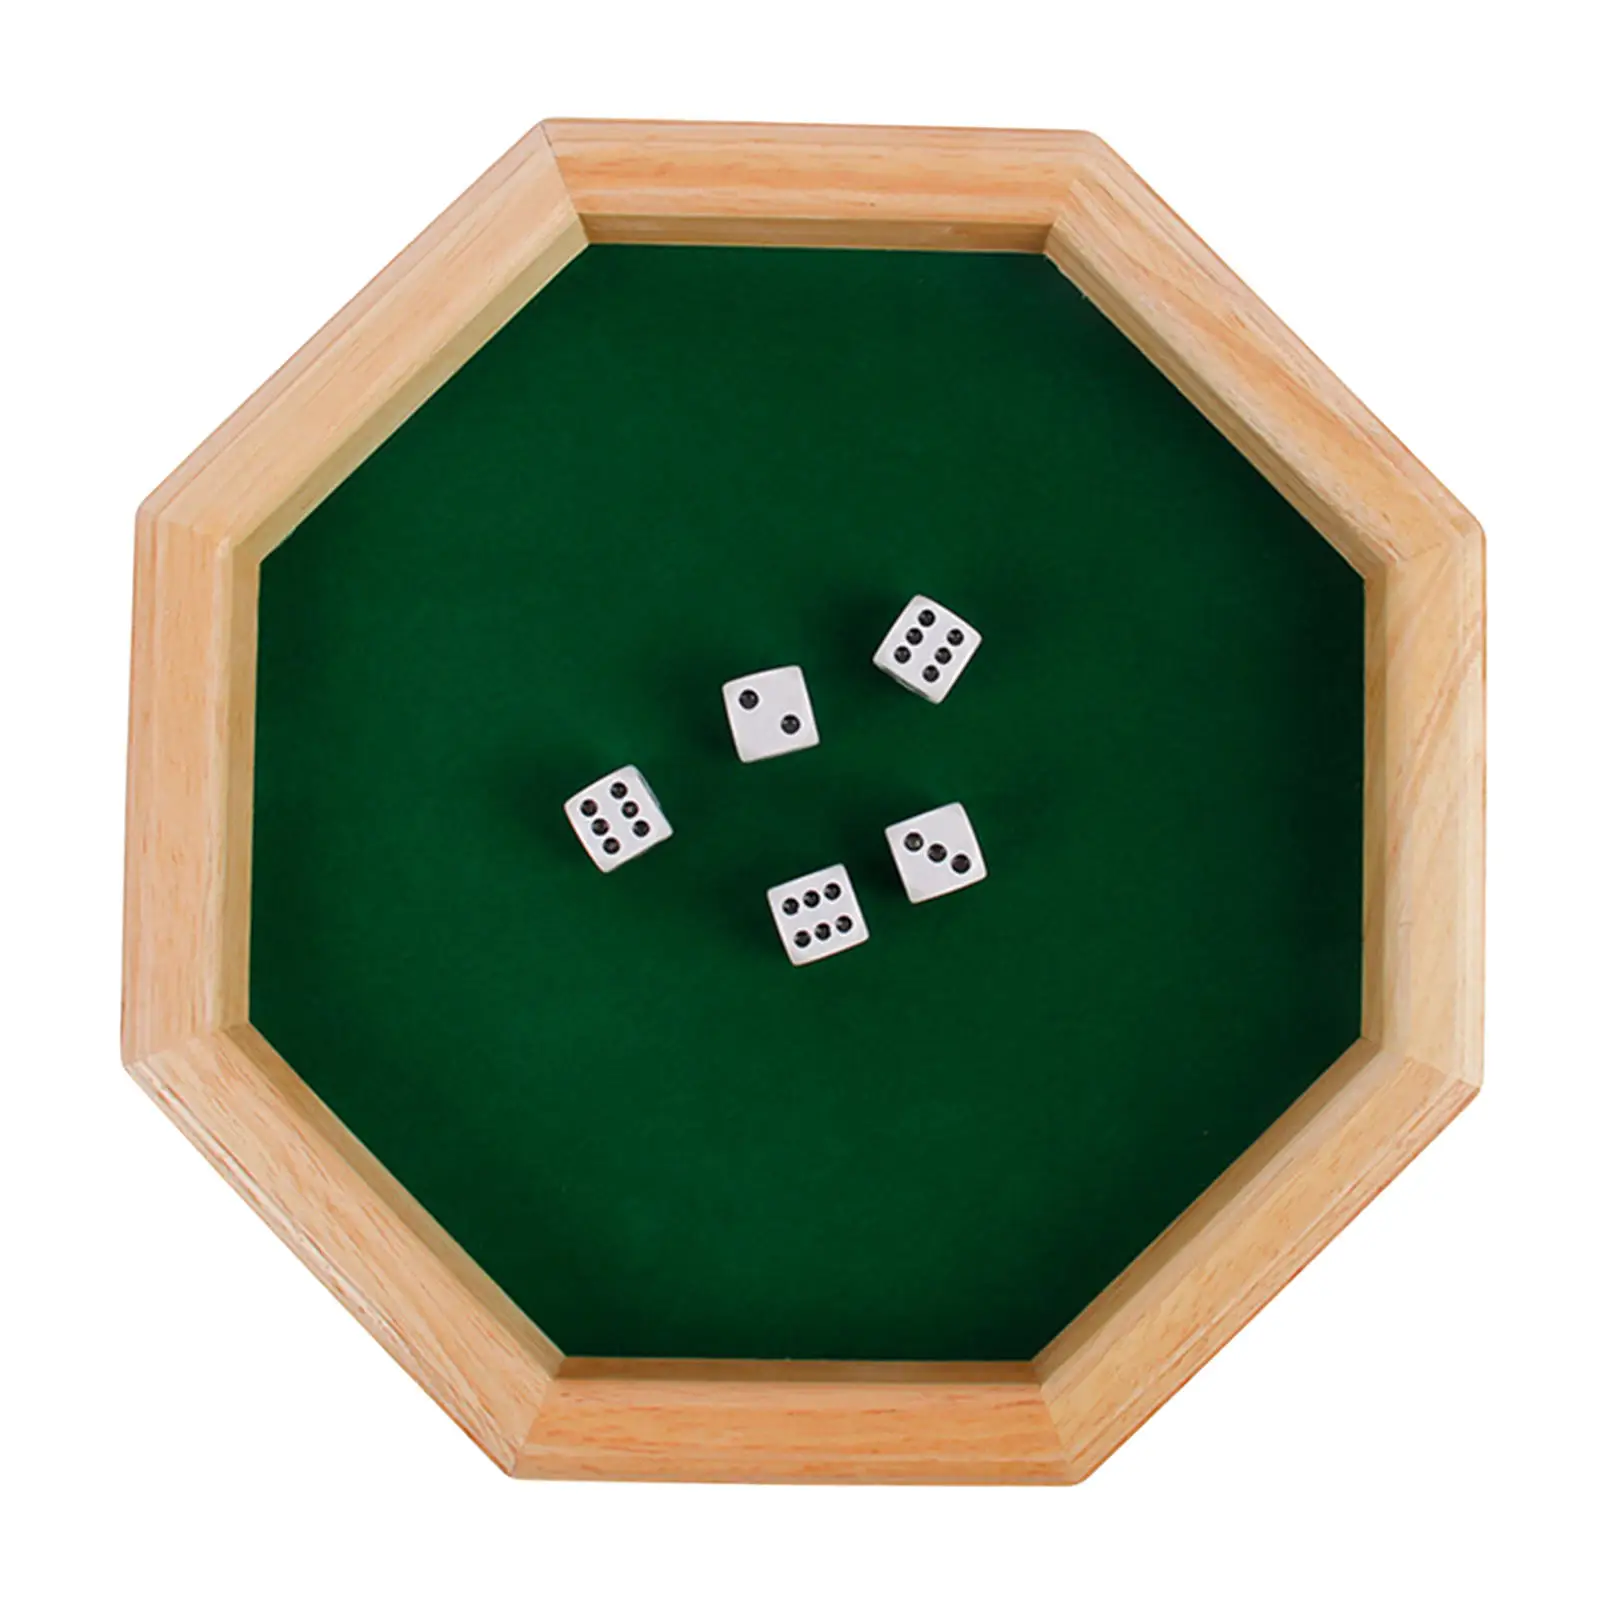 Wooden Octagonal Dice Tray Board Game with 5 Dice Felt Lined Rolling Surface for Tabletop RPGs Dice Games Green